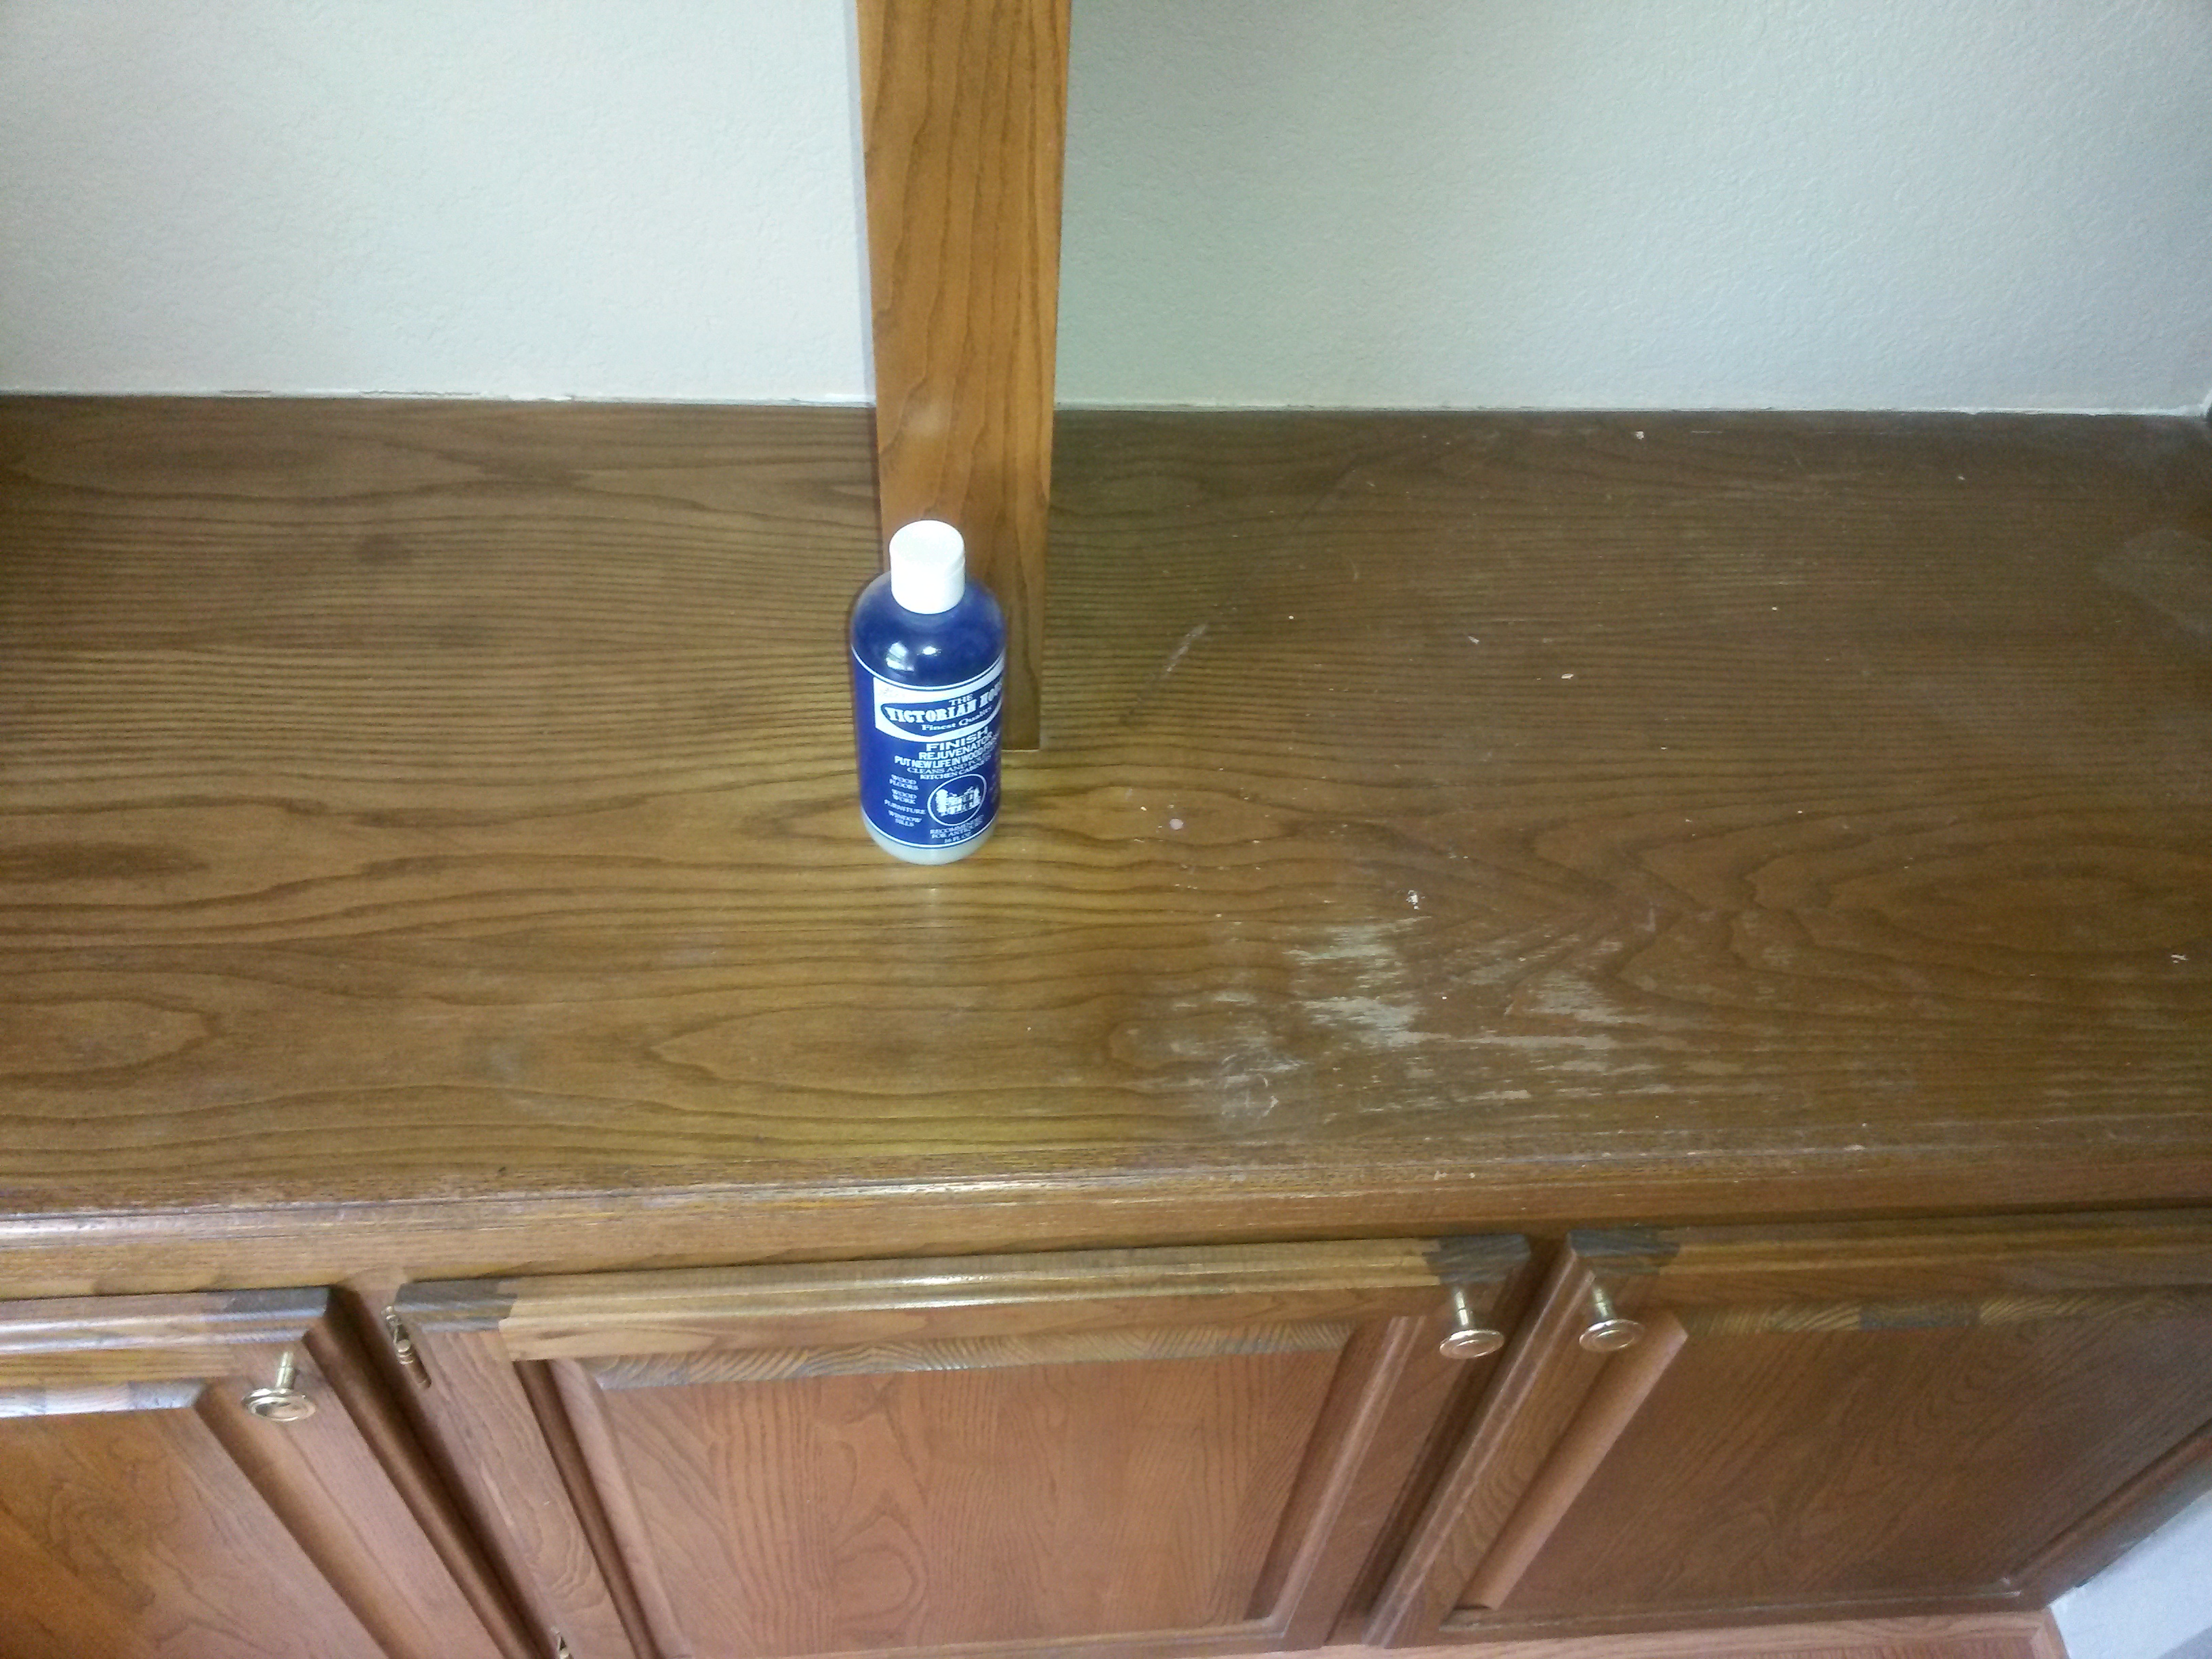 white-ring-gone-with-kitchen-cabinet-cleaner-bottle.jpg